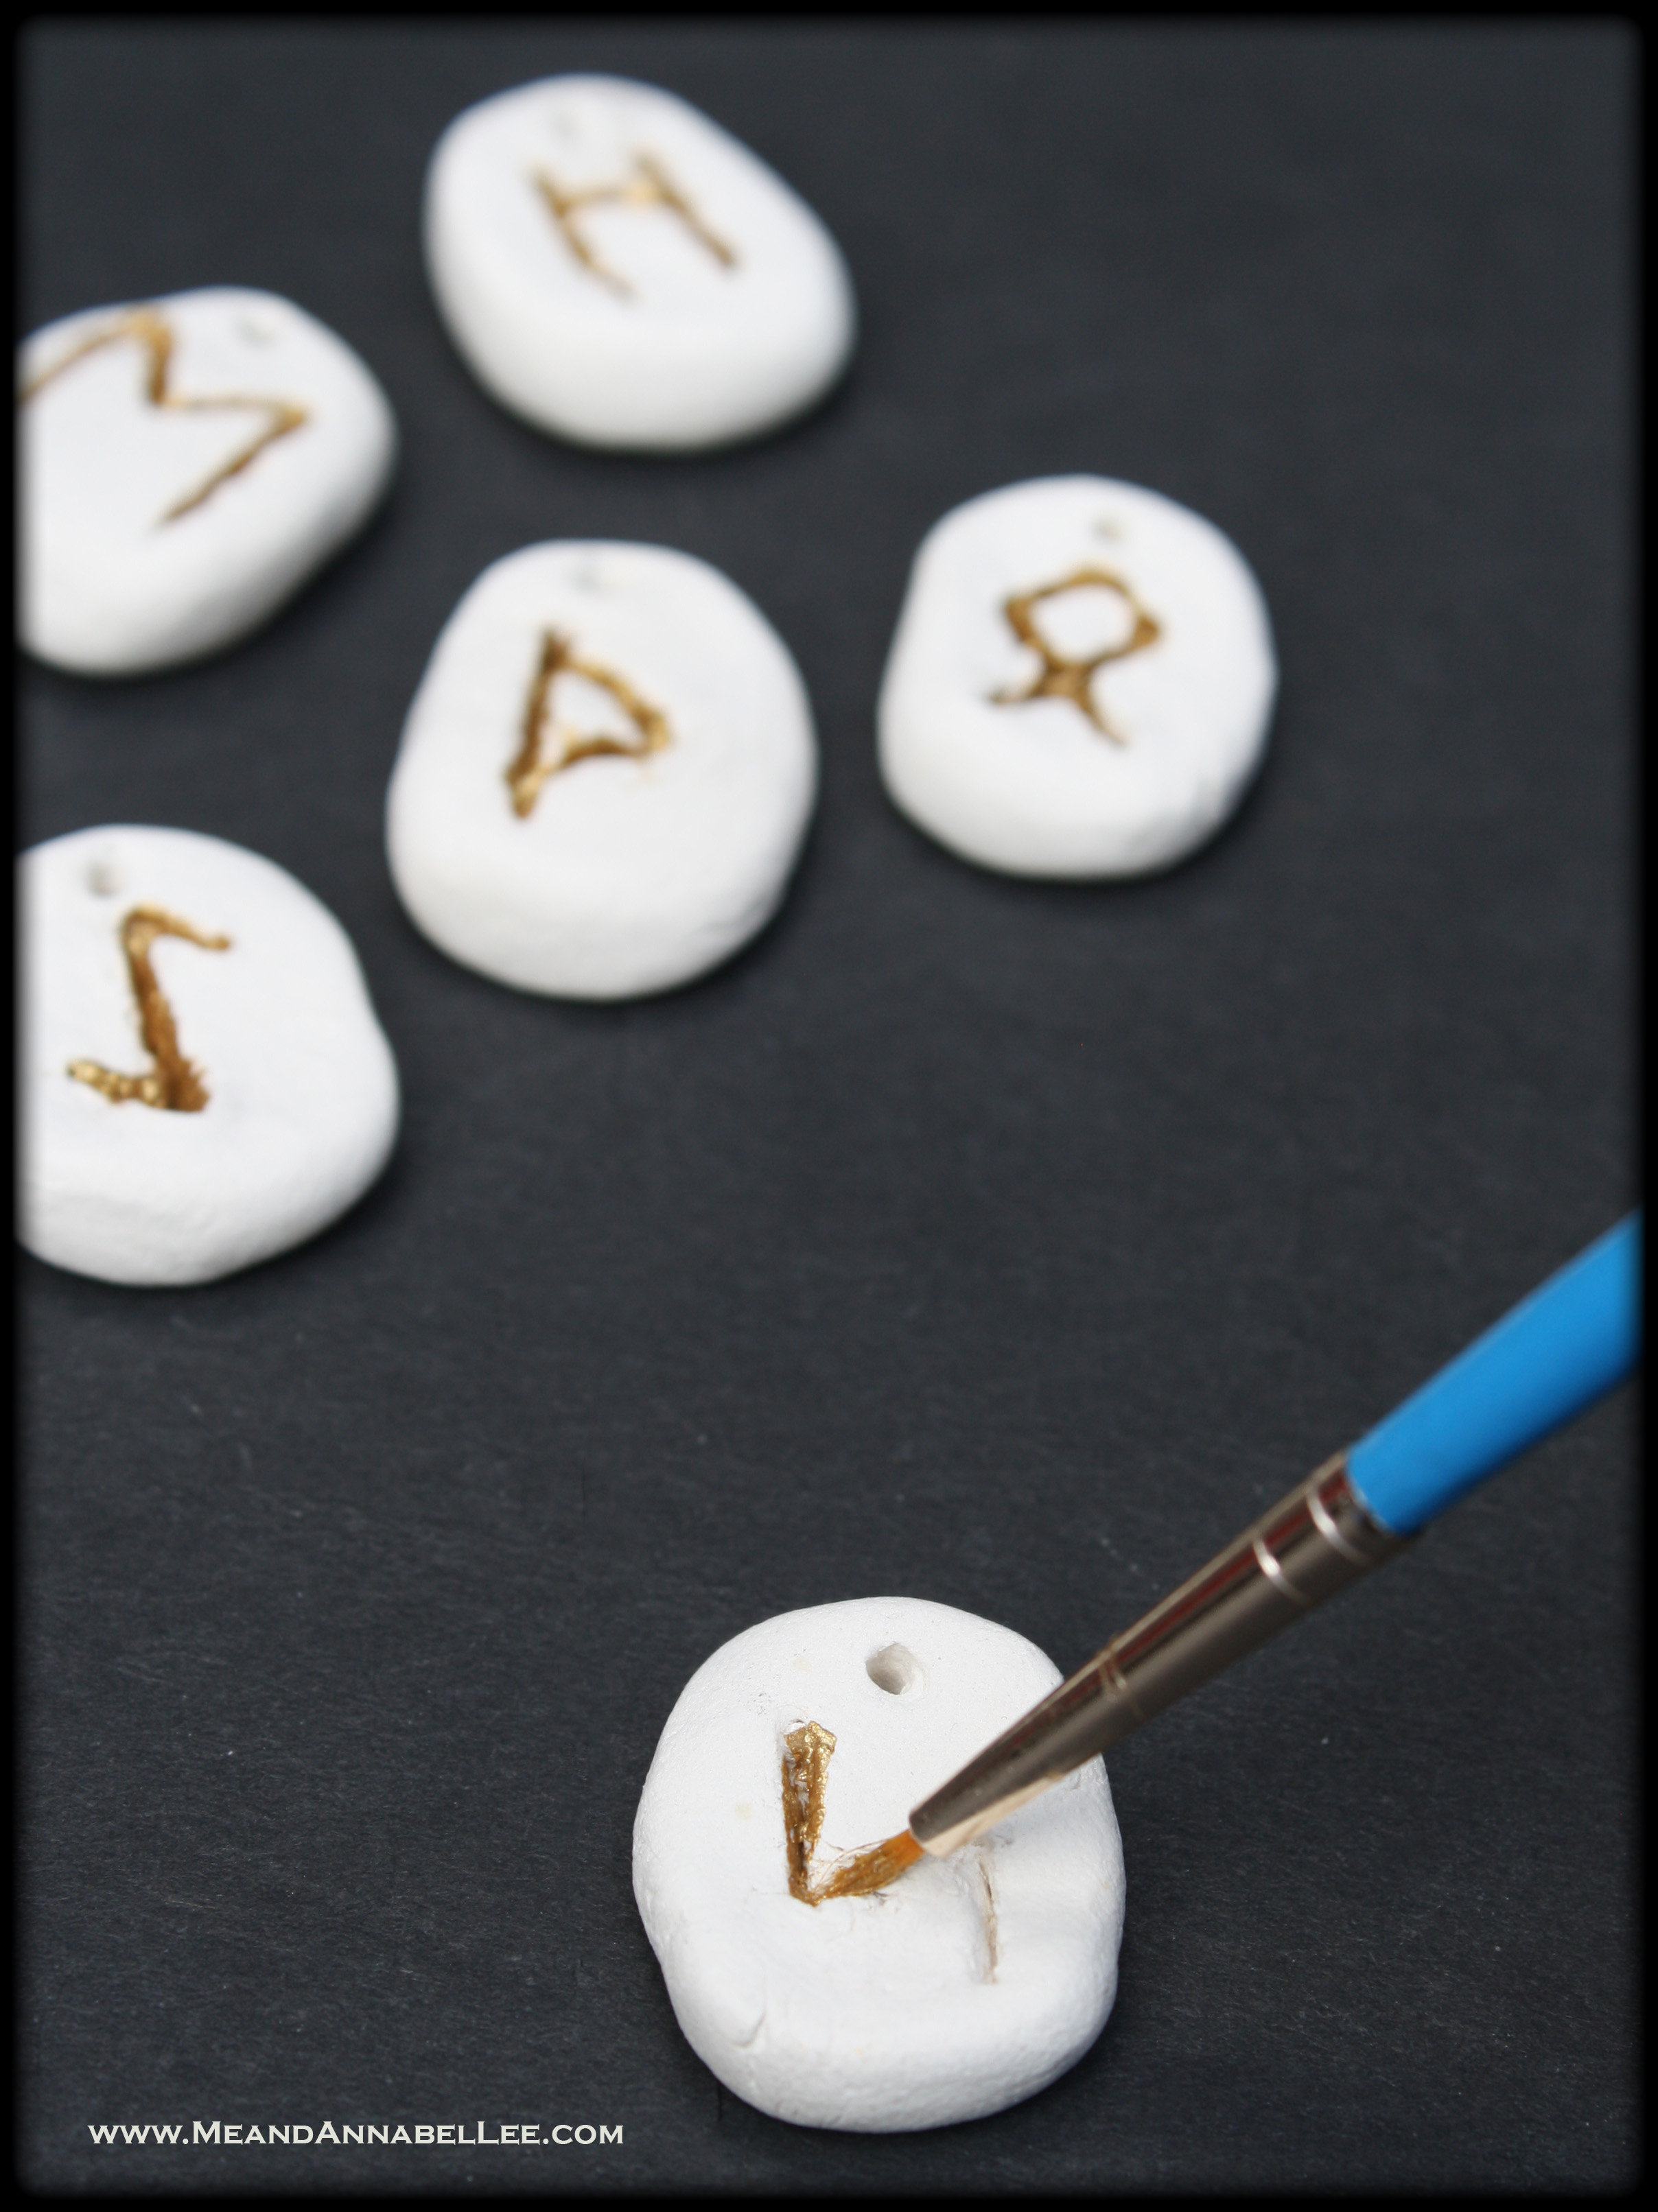 DIY Rune Stone Wine Charms | How to paint and engrave the Runic Alphabet into Paper Clay | Pagan Divination Tool | www.MeandAnnabelLee.com